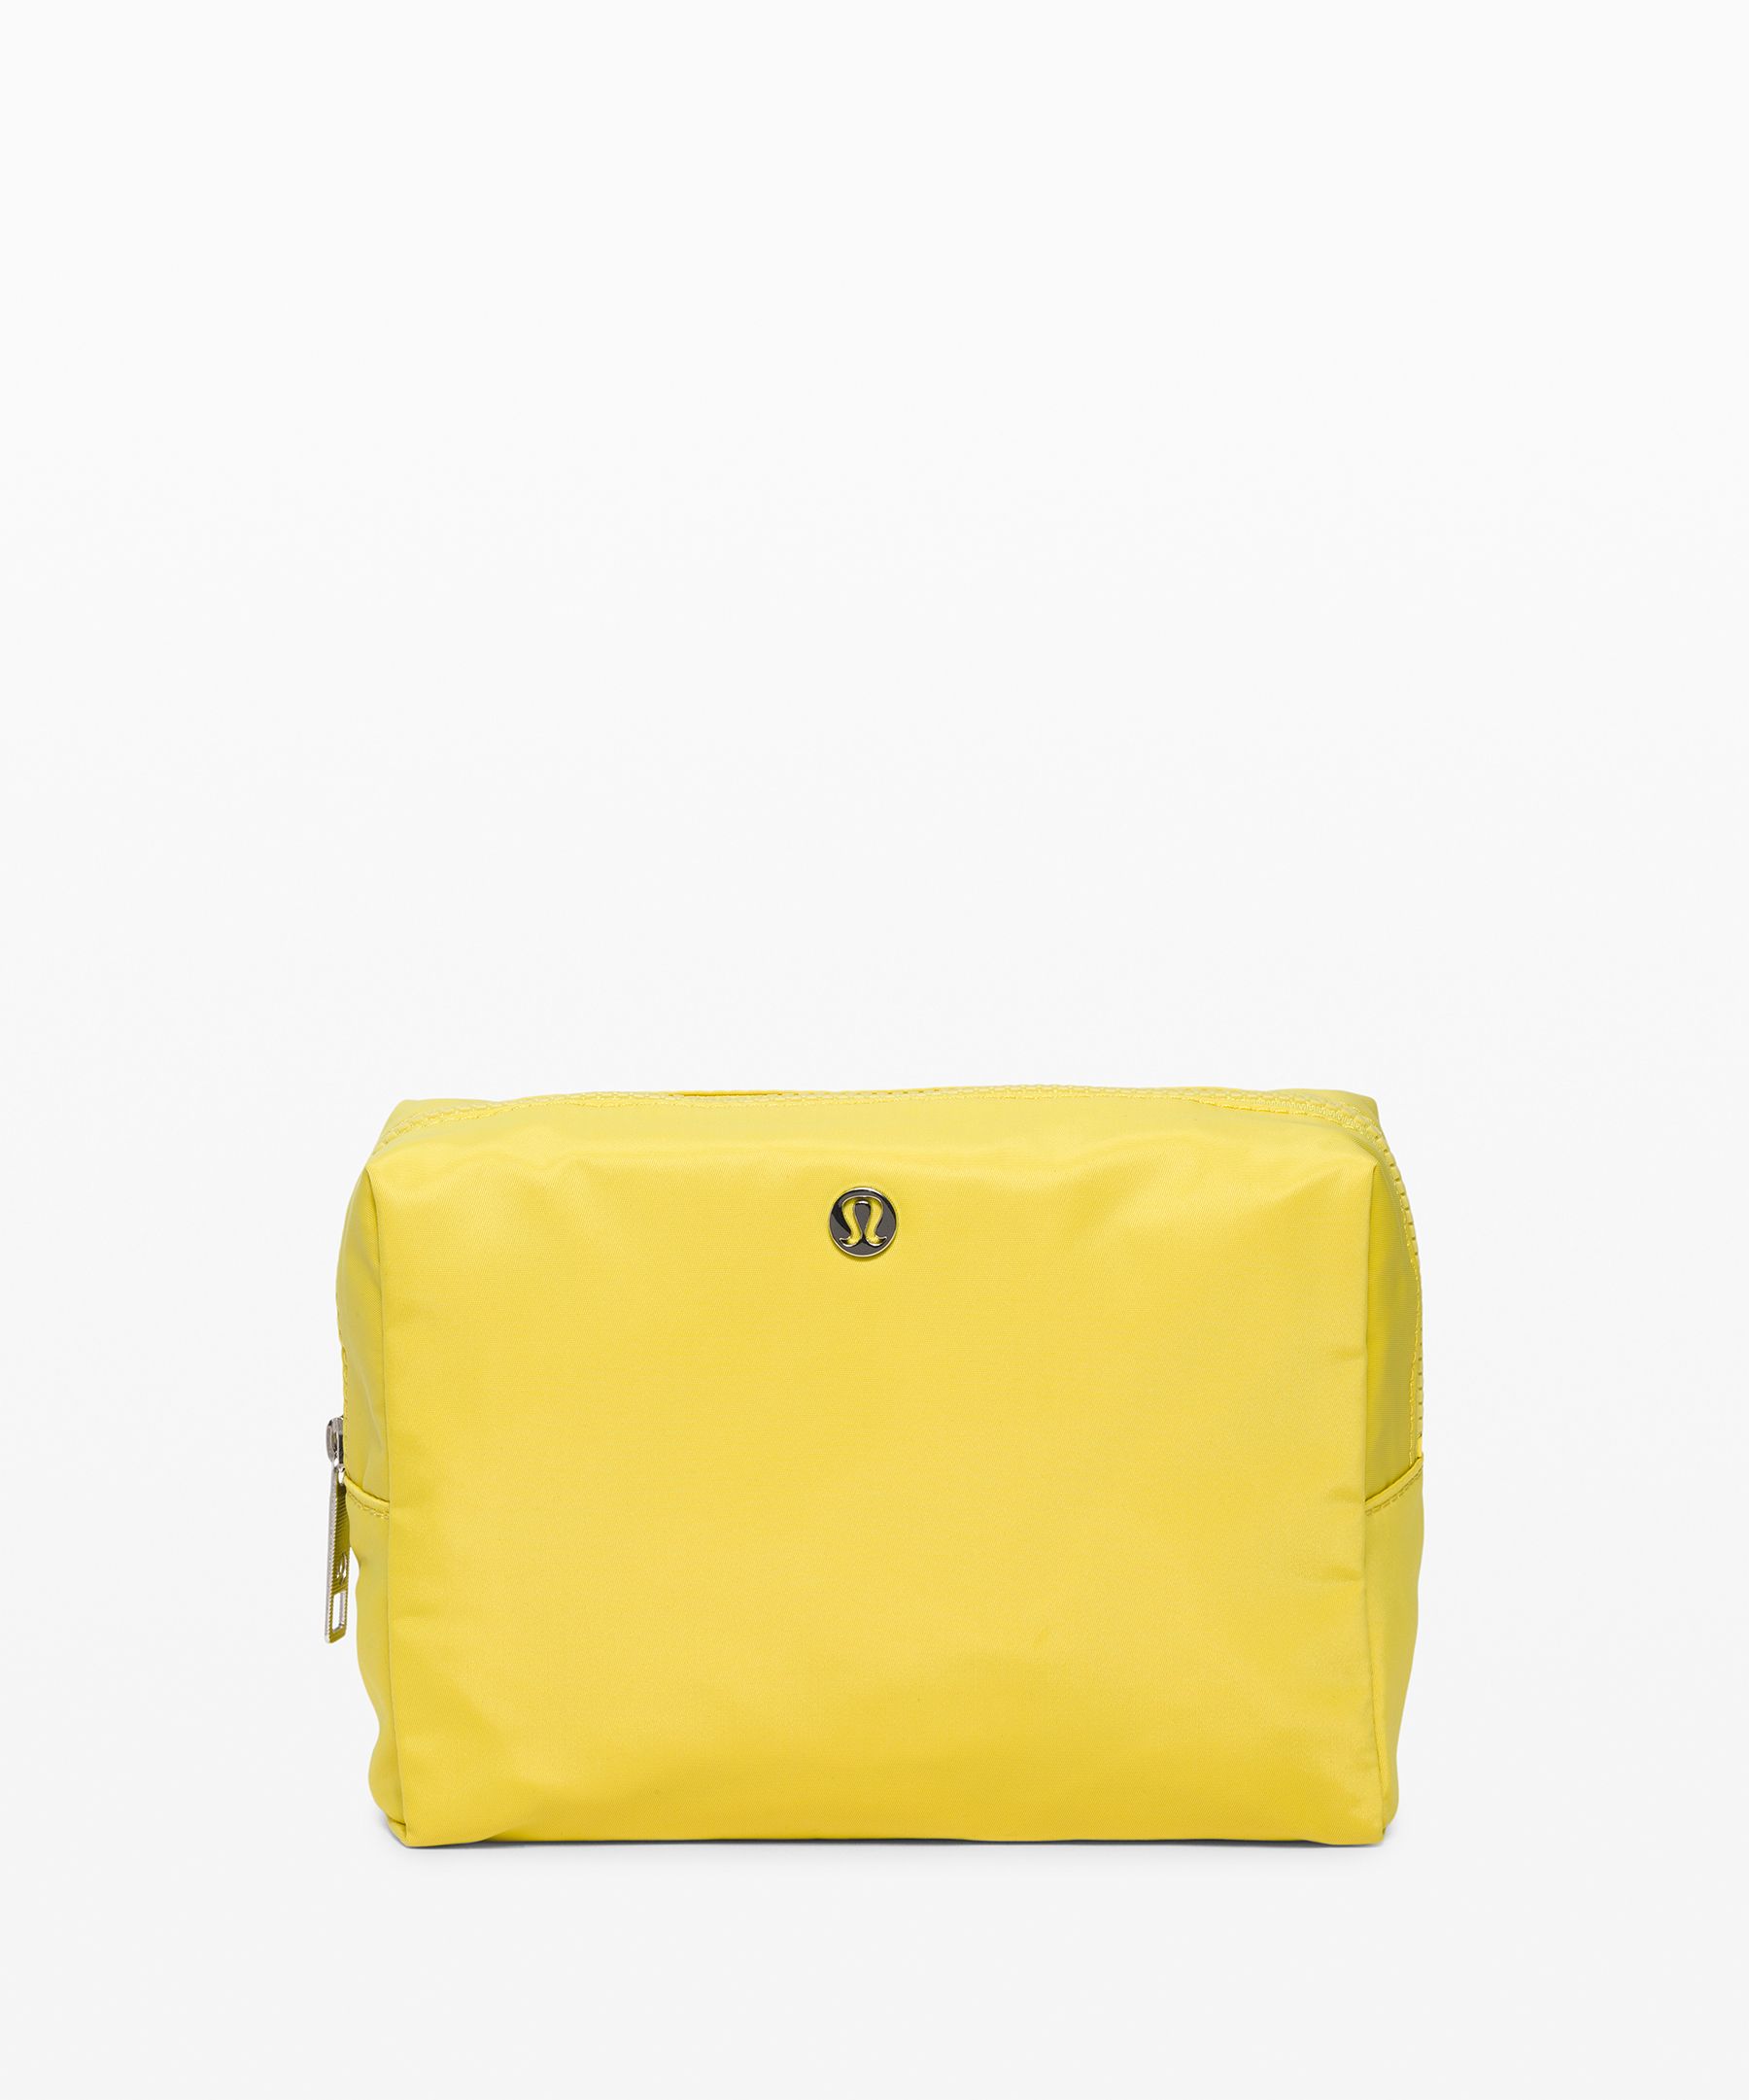 Lululemon All Your Small Things Pouch *4l In Soleil